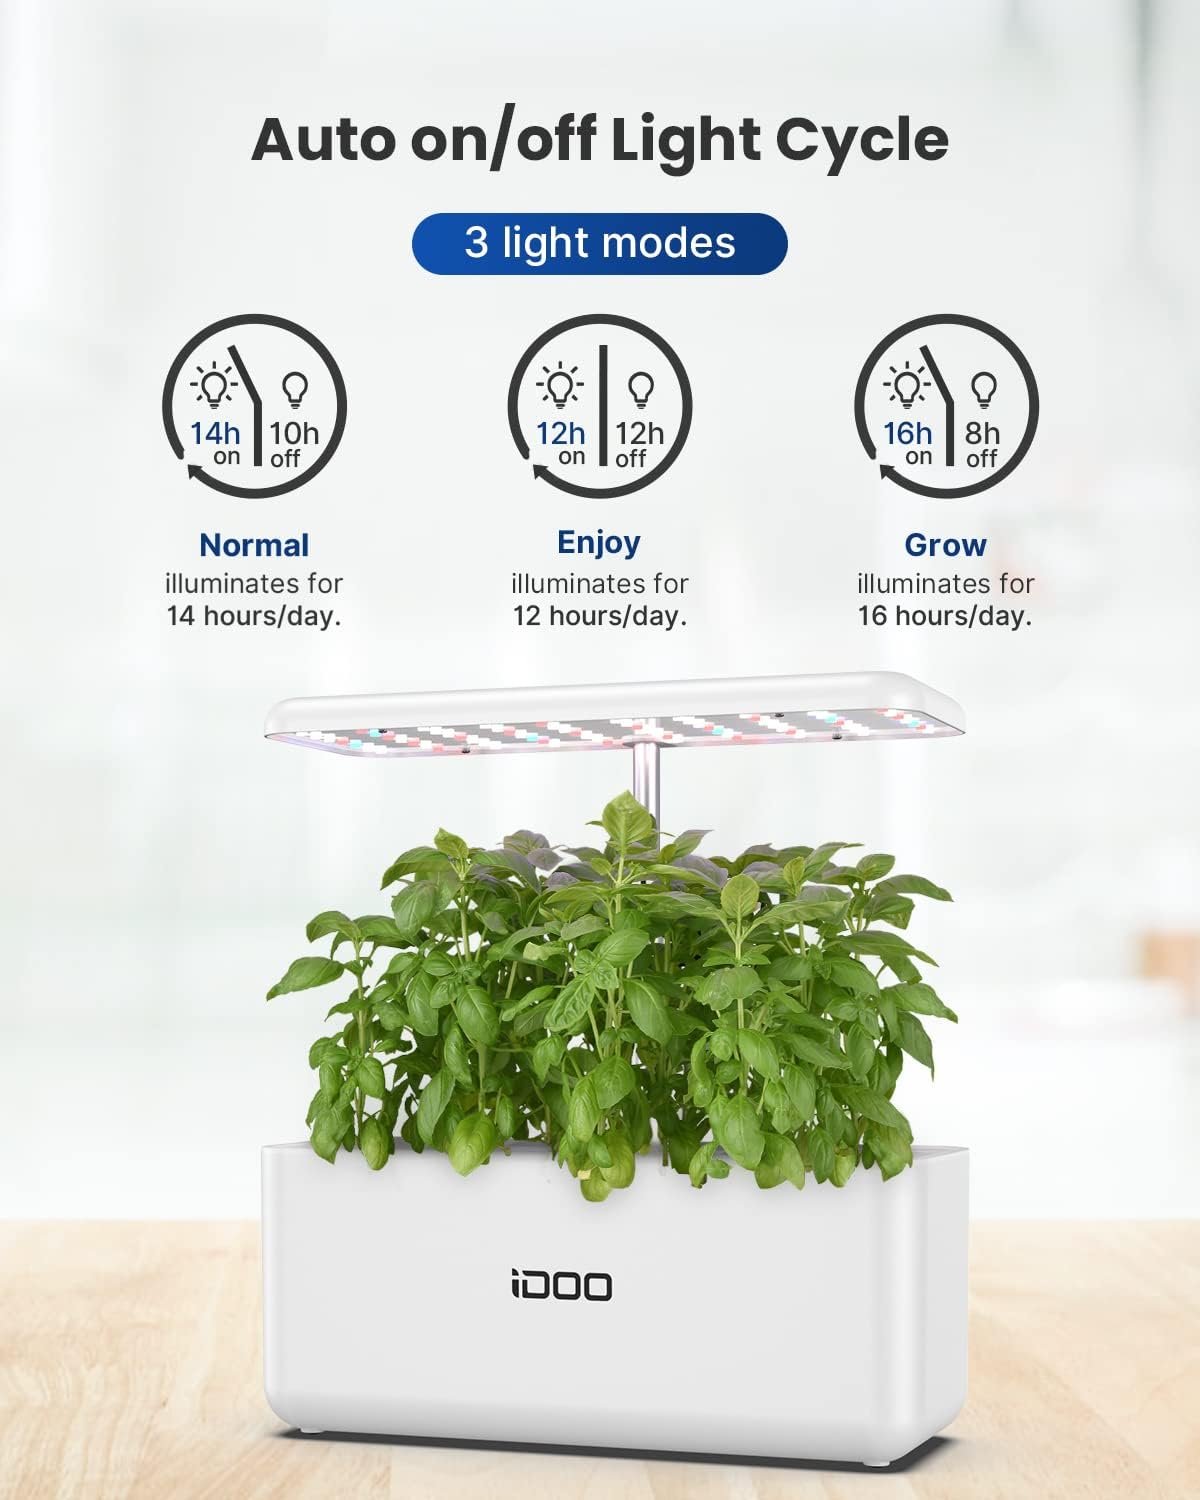 iDOO Hydroponics Growing System Kit 12Pods, Indoor Garden with LED Grow Light, Loved Gift for Green Thumbs Christmas, Built-in Fan, Auto-Timer, Adjustable Height Up to 11.3 for Home, Office